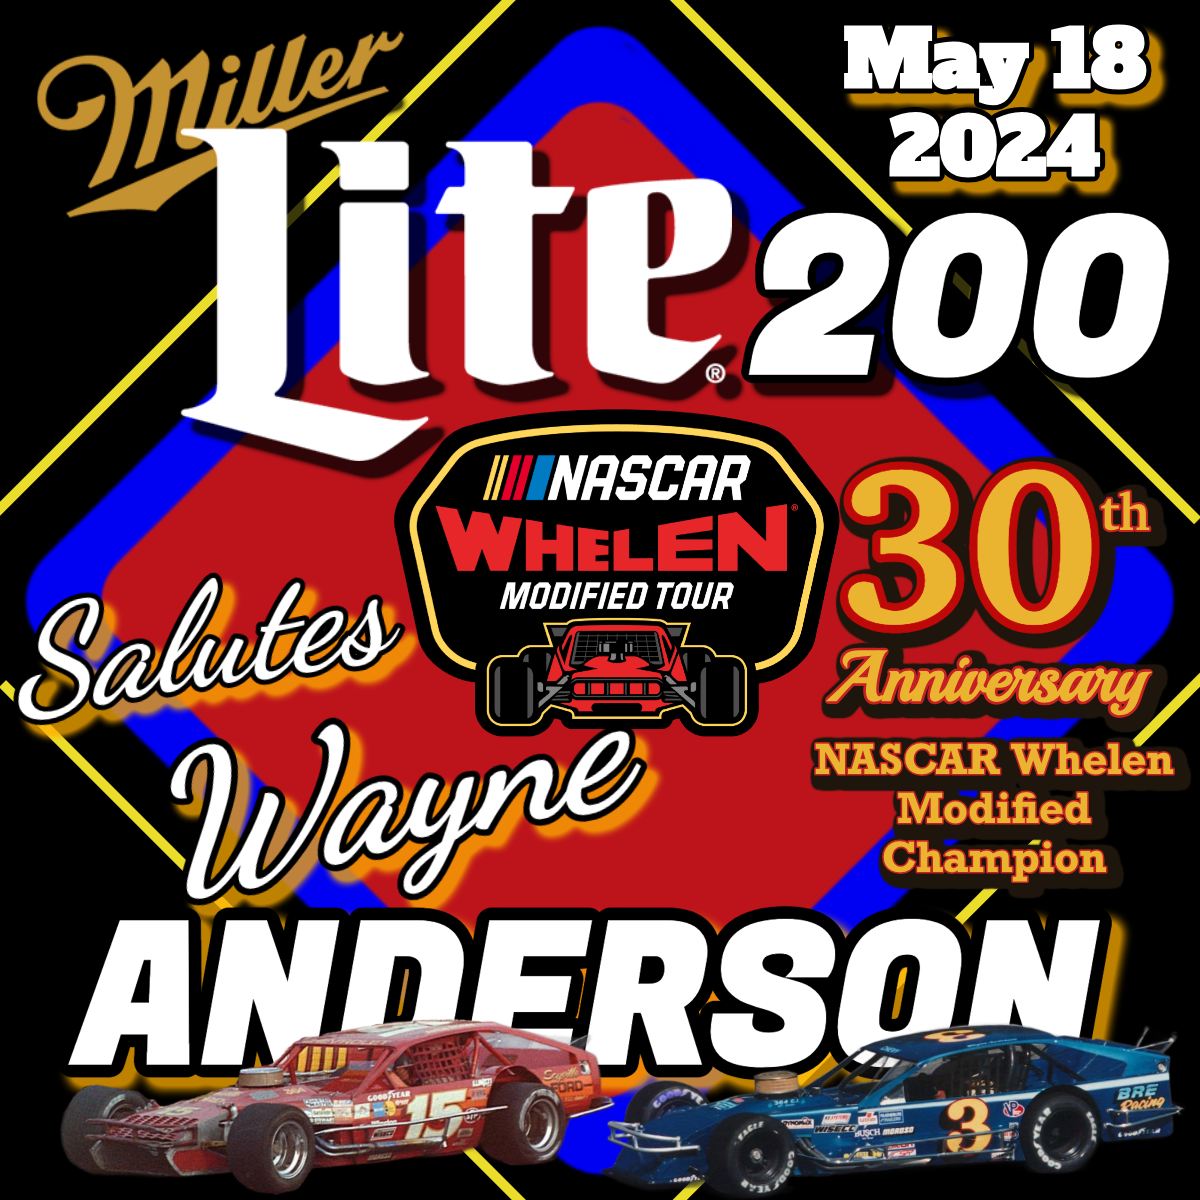 We are one month away from May 18th and the NASCAR Whelen Modified Tour rolling into town, as we salute Wayne Anderson and marking his 30th Anniversary of being Tour Champion, with the Miller Lite 200.